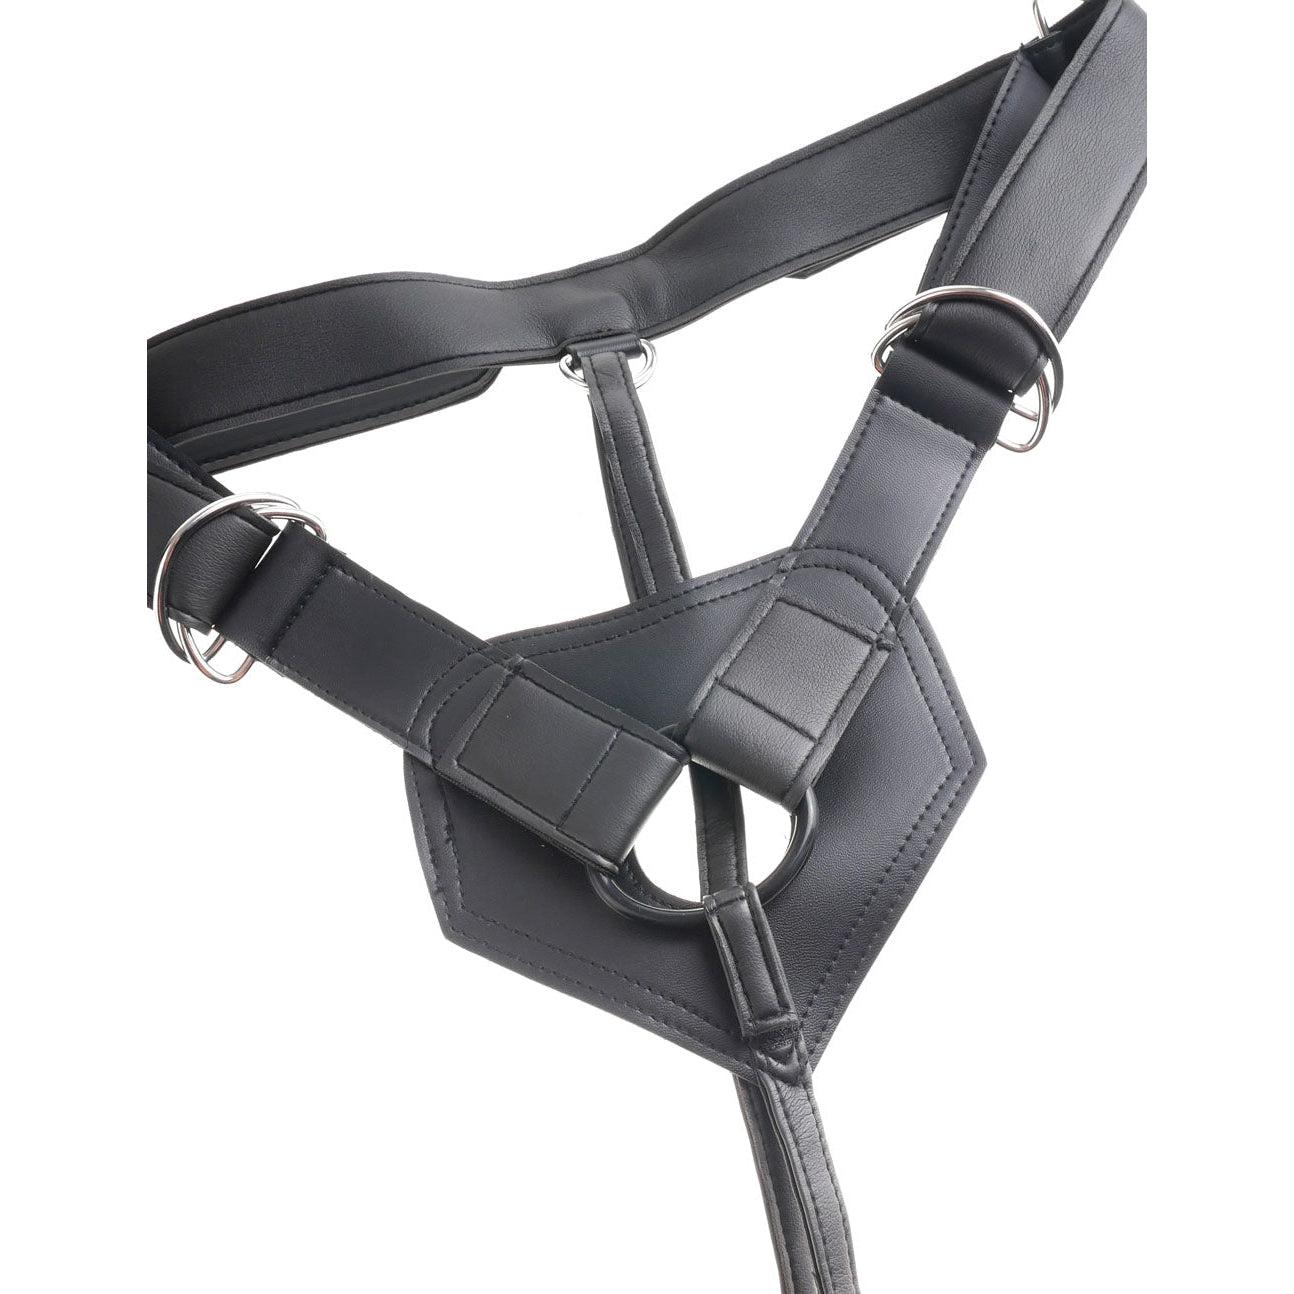 King Cock Strap-on Harness With 7 Inch Cock - Tan